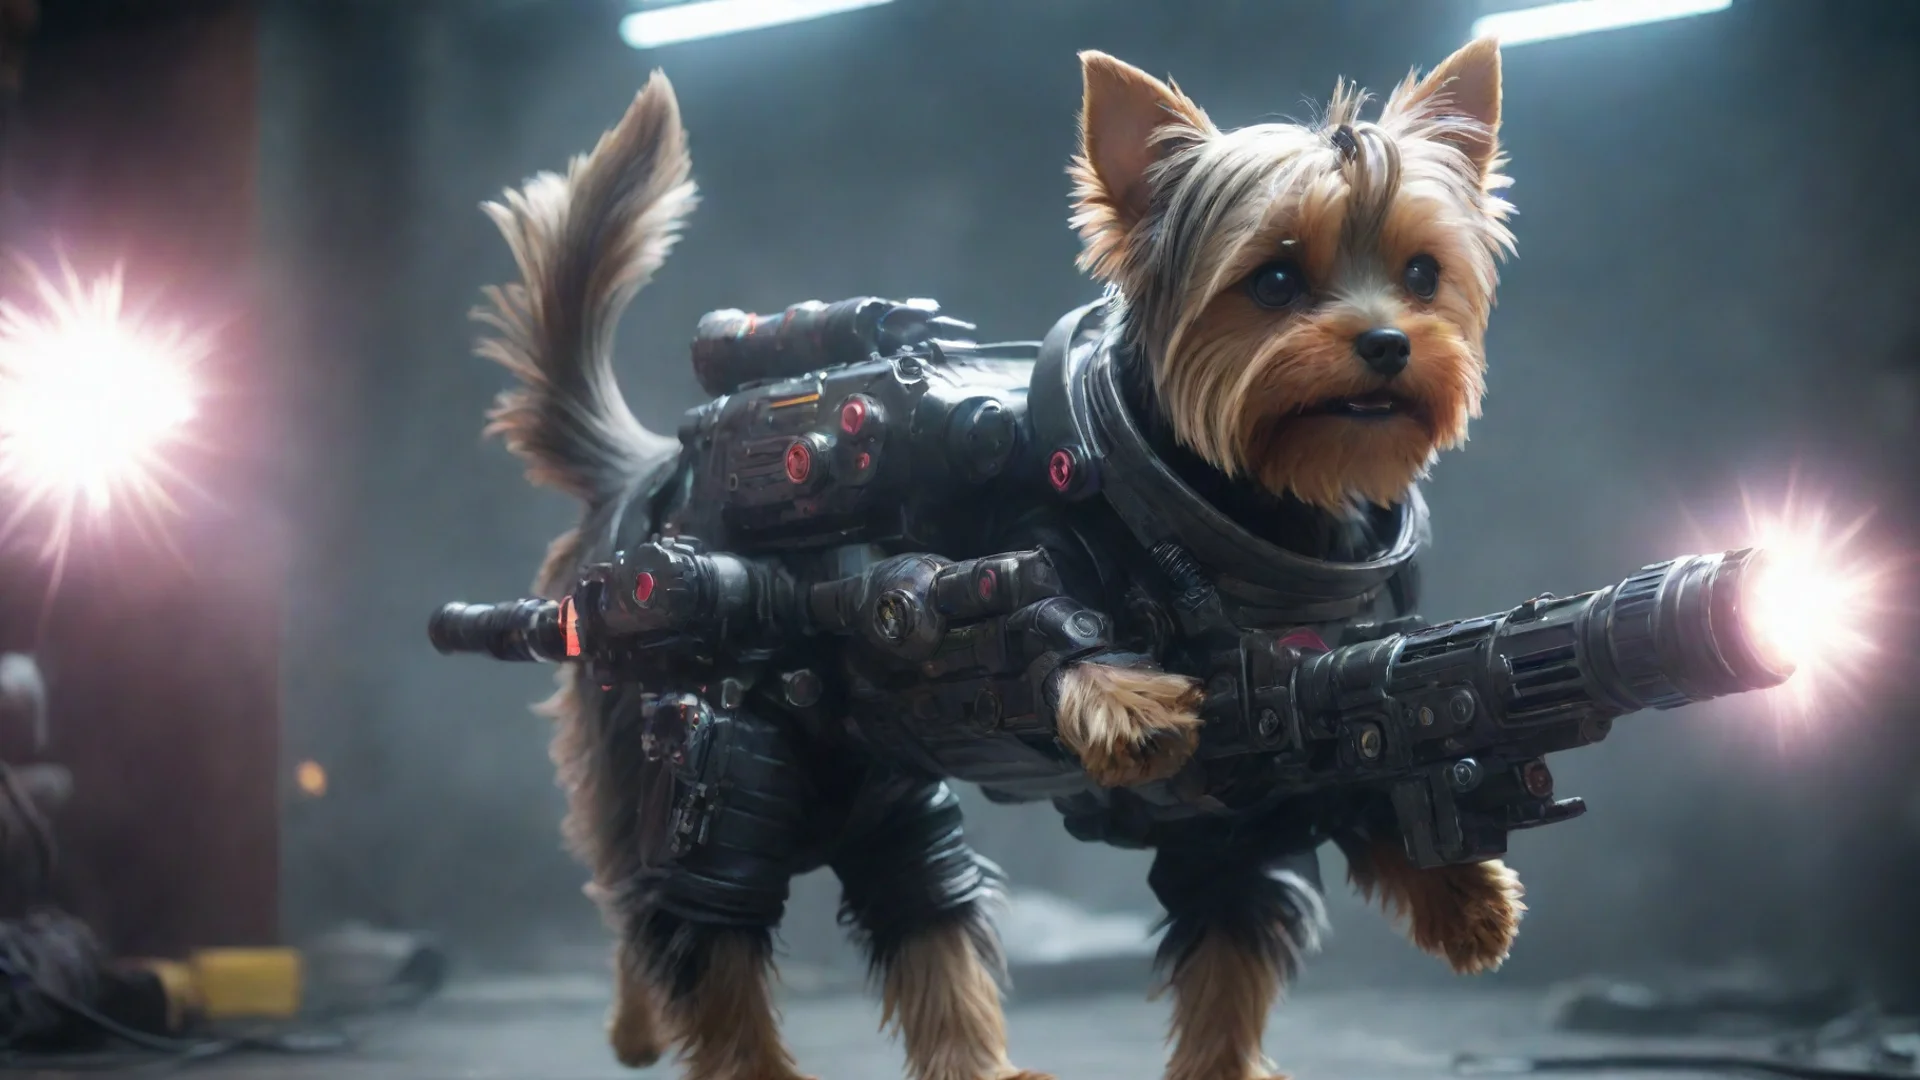 aiaione yorkshire terrier in a cyberpunk space suit firing big weapon lot lighting wide